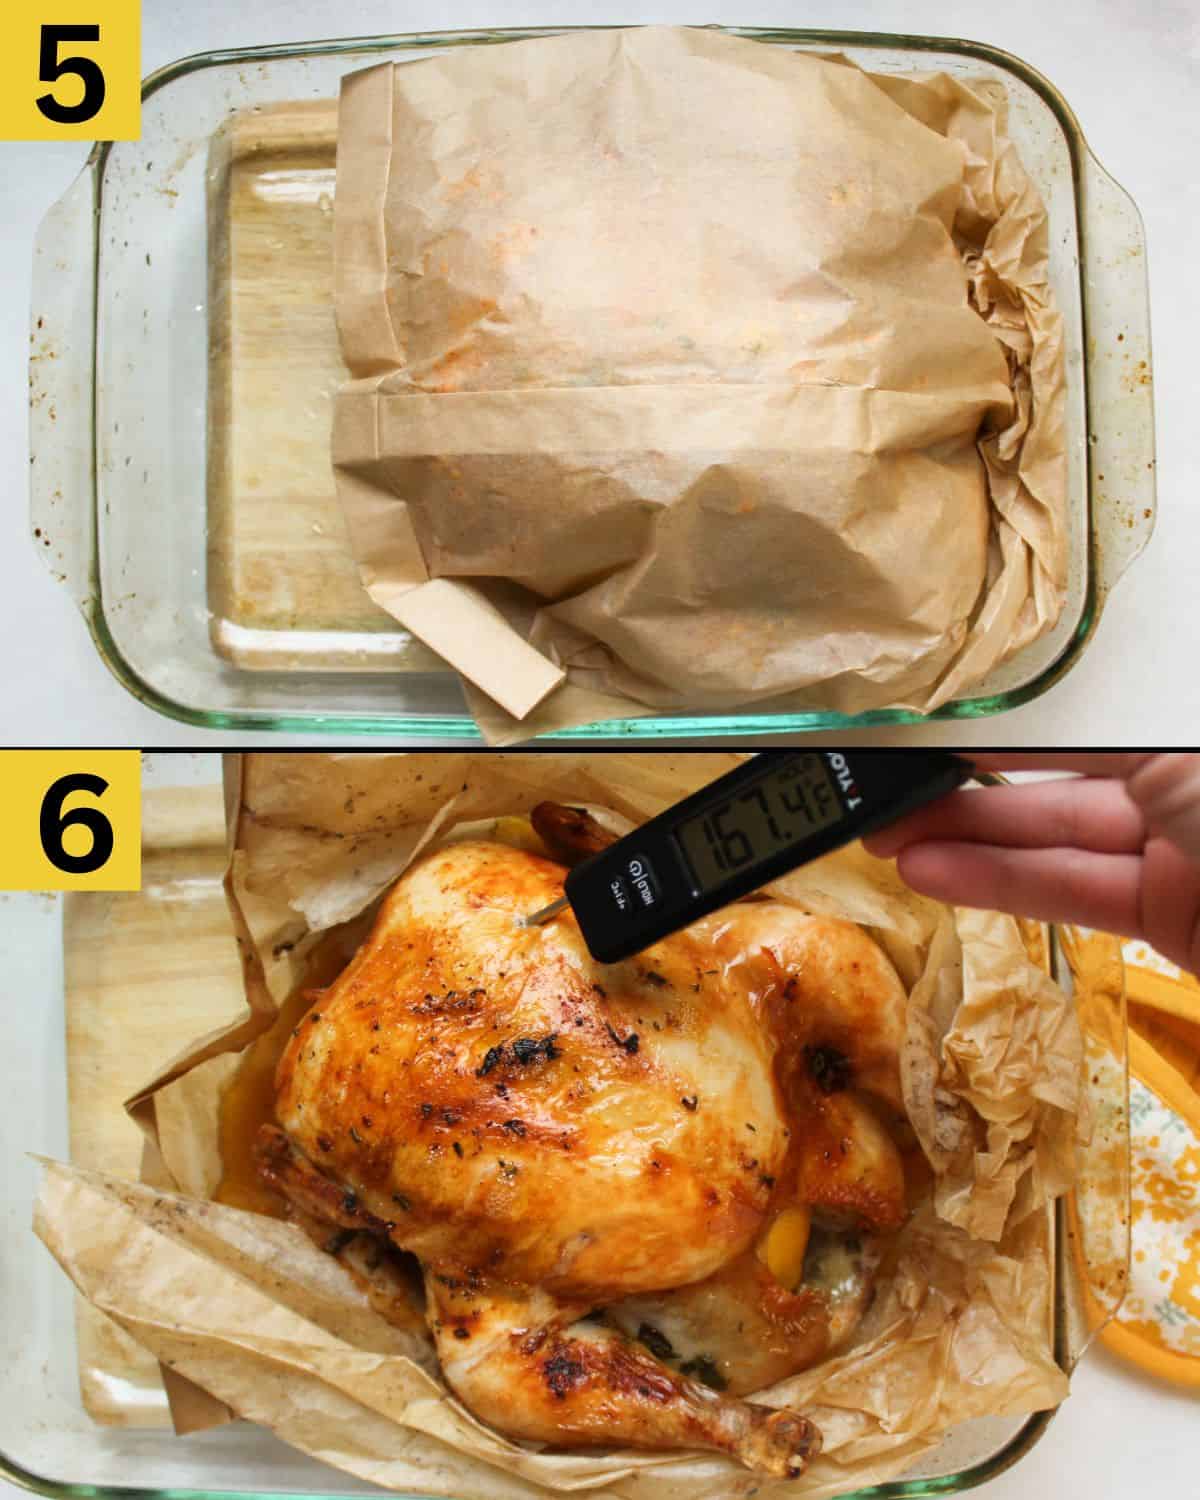 The process of placing the chicken in a bag for baking and checking the internal temperature after roasting.